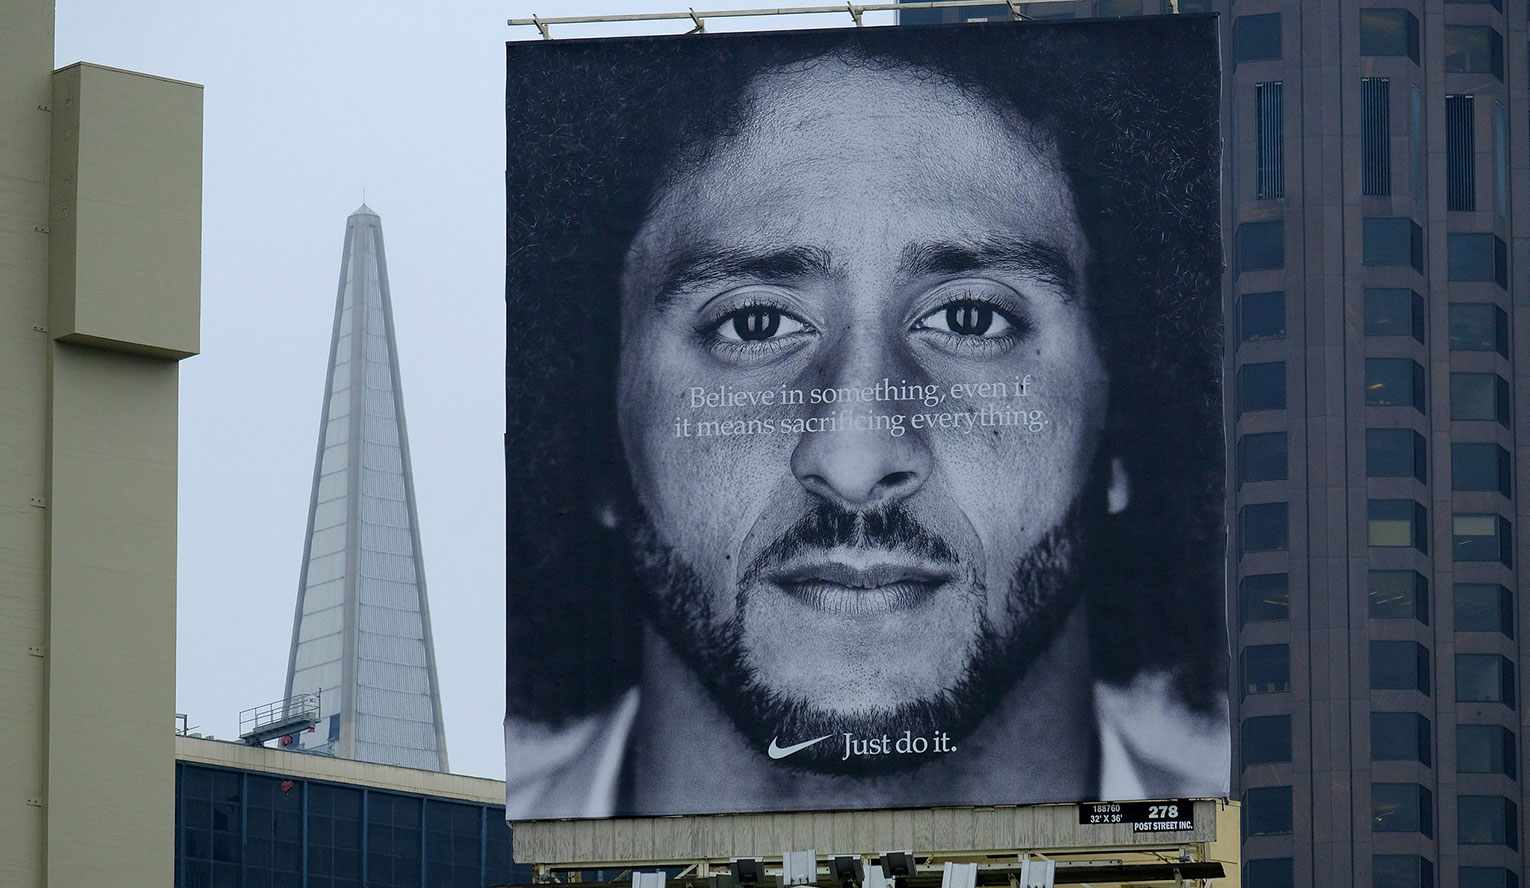 A giant billboard Nike ad featuring the face of kneeling quarterback Colin Kaepernick with the text, “Believe in something, even if it means sacrificing everything. Just do it.” Source: The New York Times.